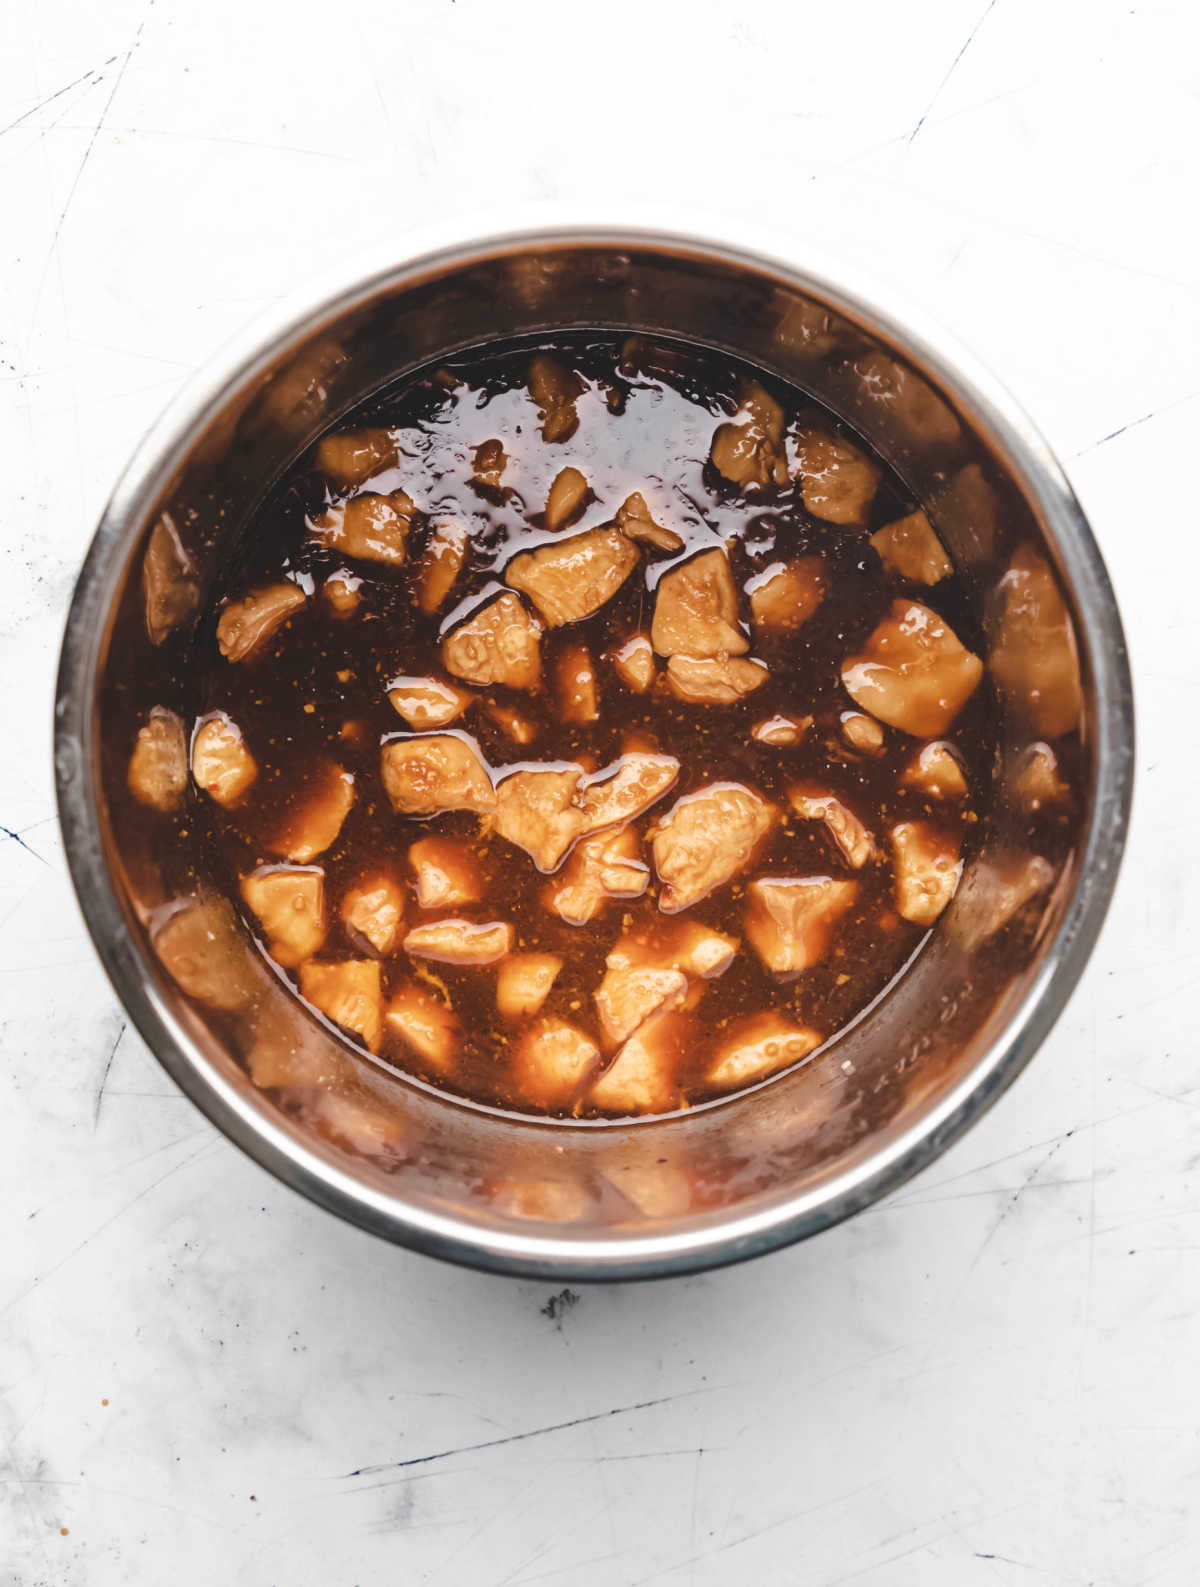 Soy sauce mixture over diced chicken in an Instant Pot. 